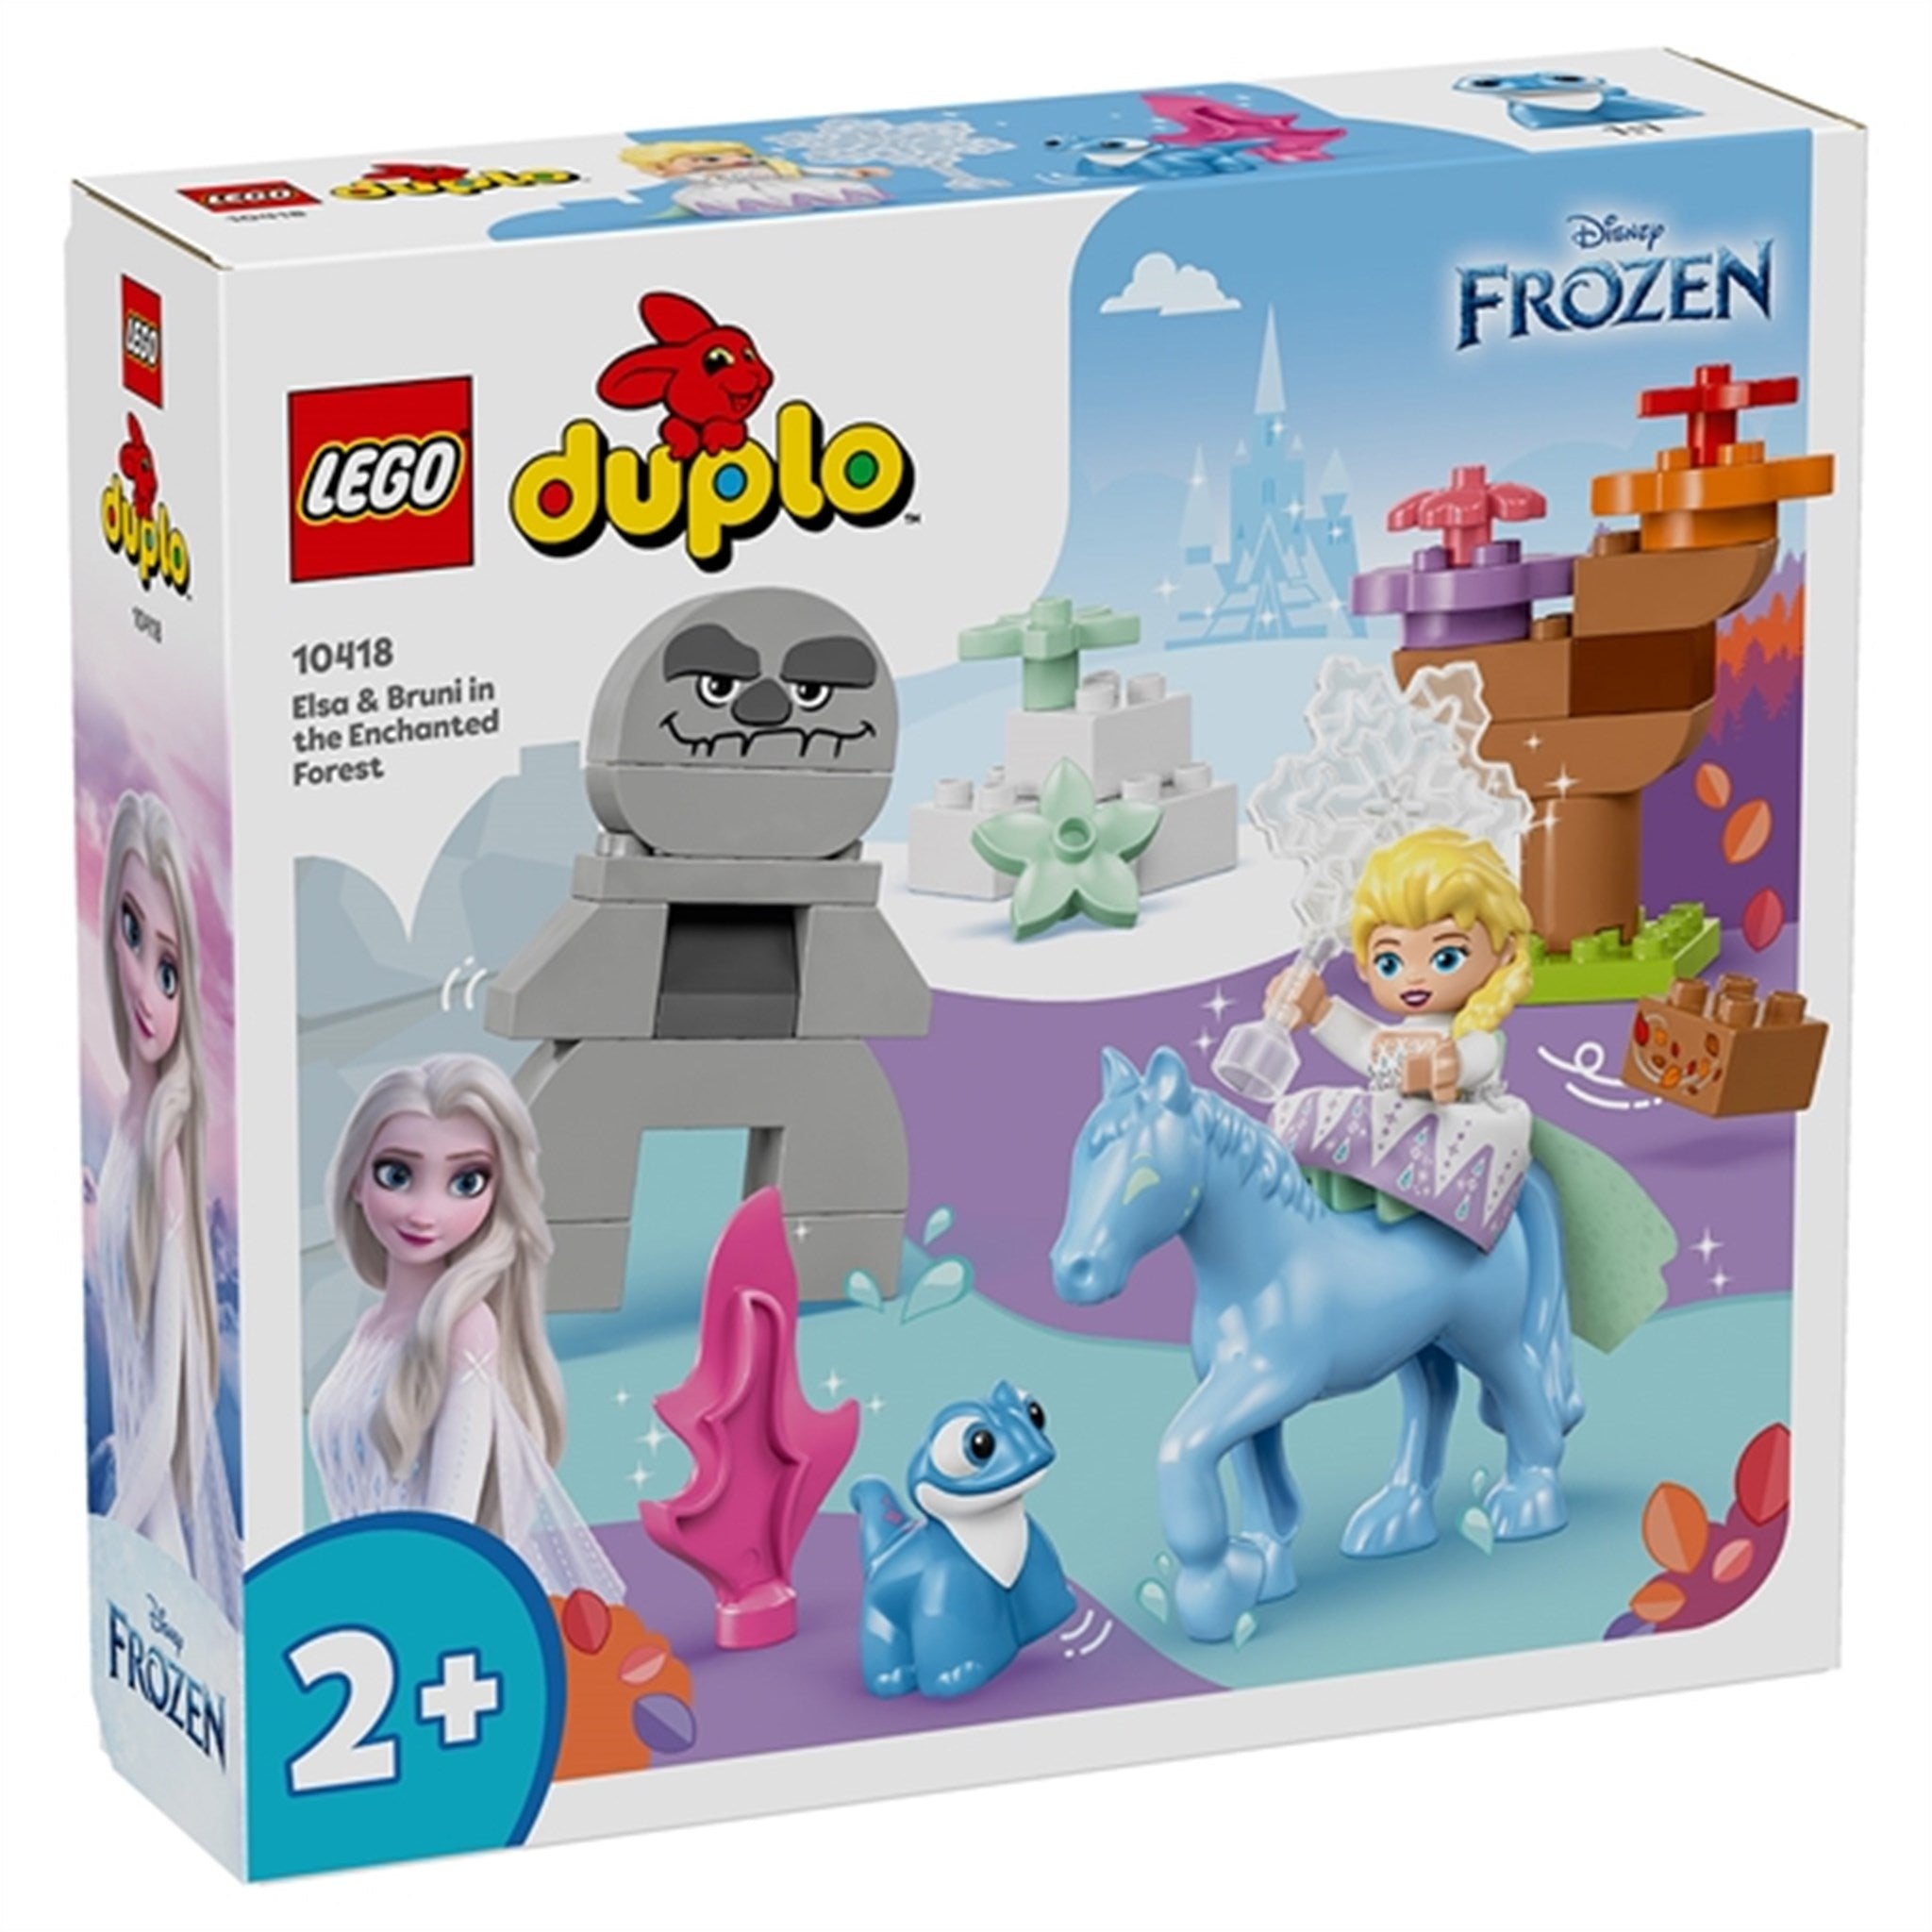 LEGO® DUPLO® Elsa & Bruni in the Enchanted Forest